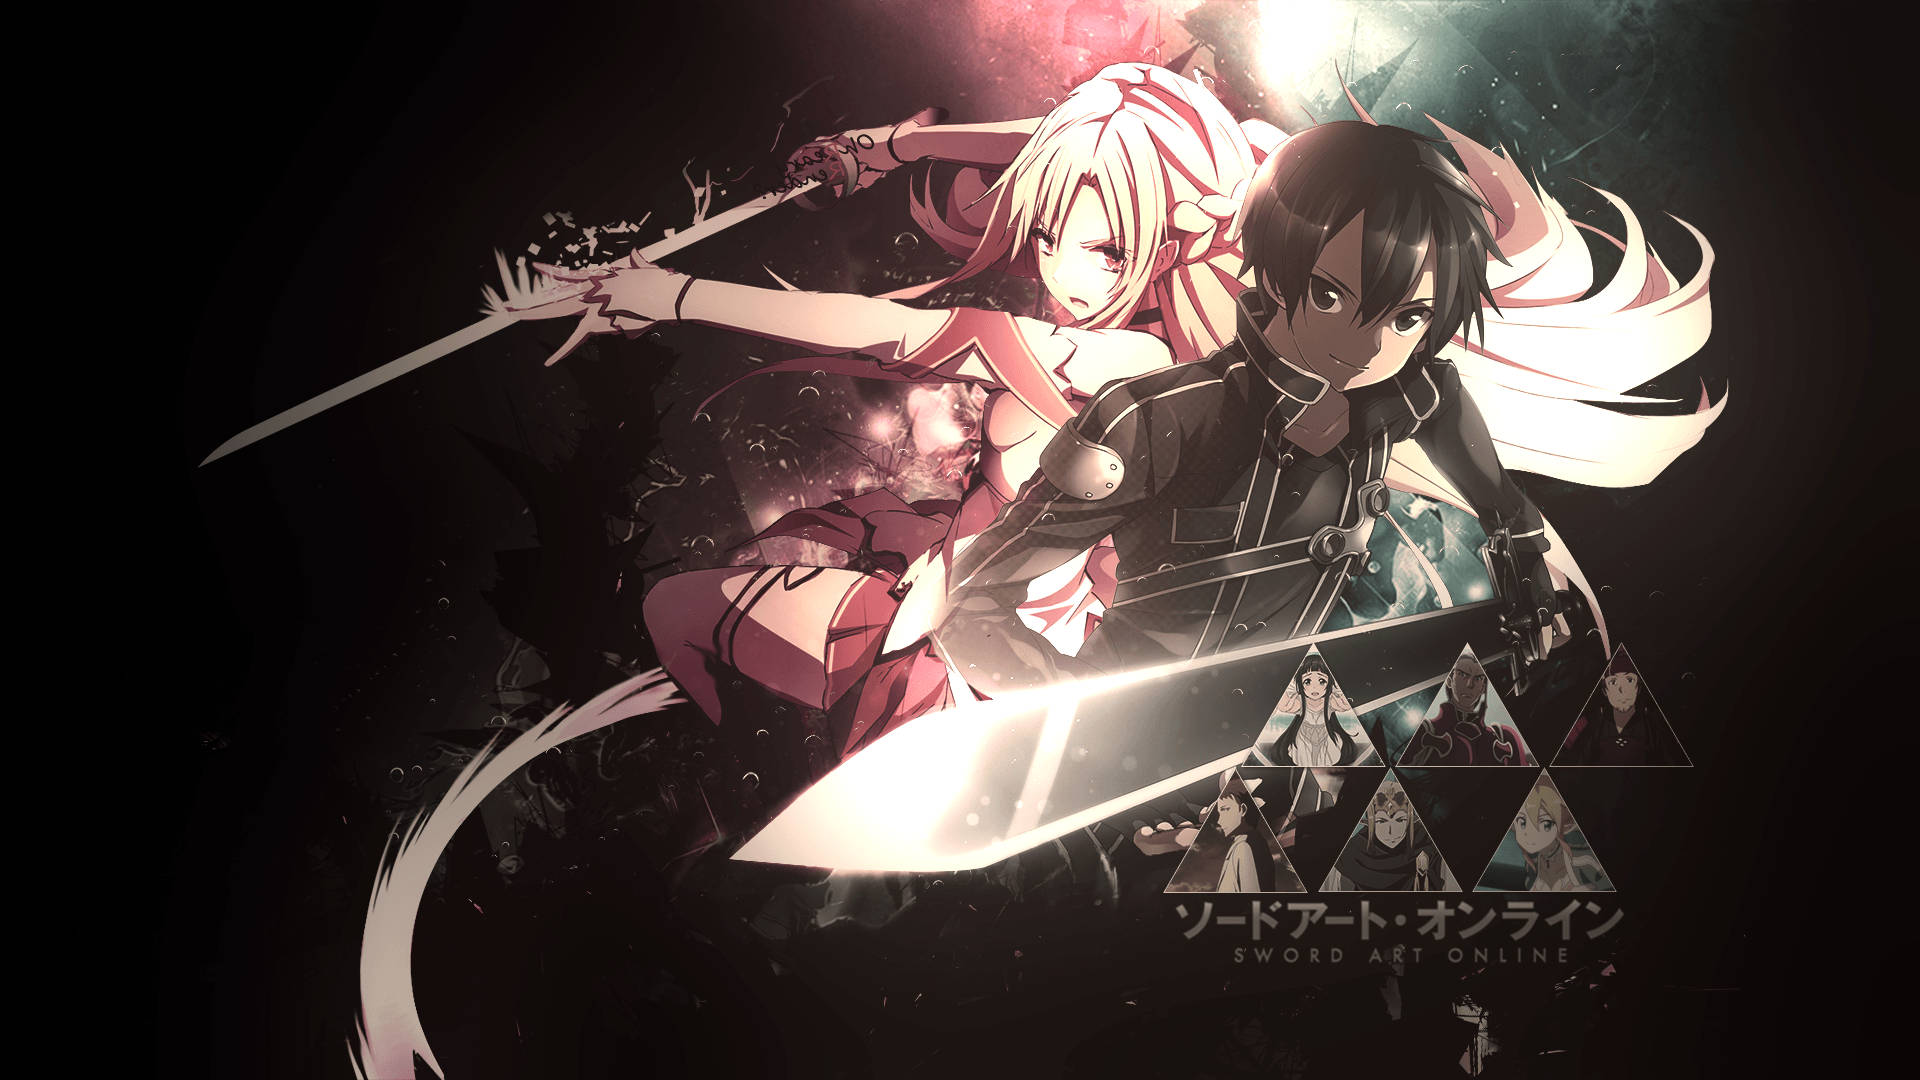 Kirito and Asuna, two of the protagonists from Sword Art Online, battle on home turf. Wallpaper